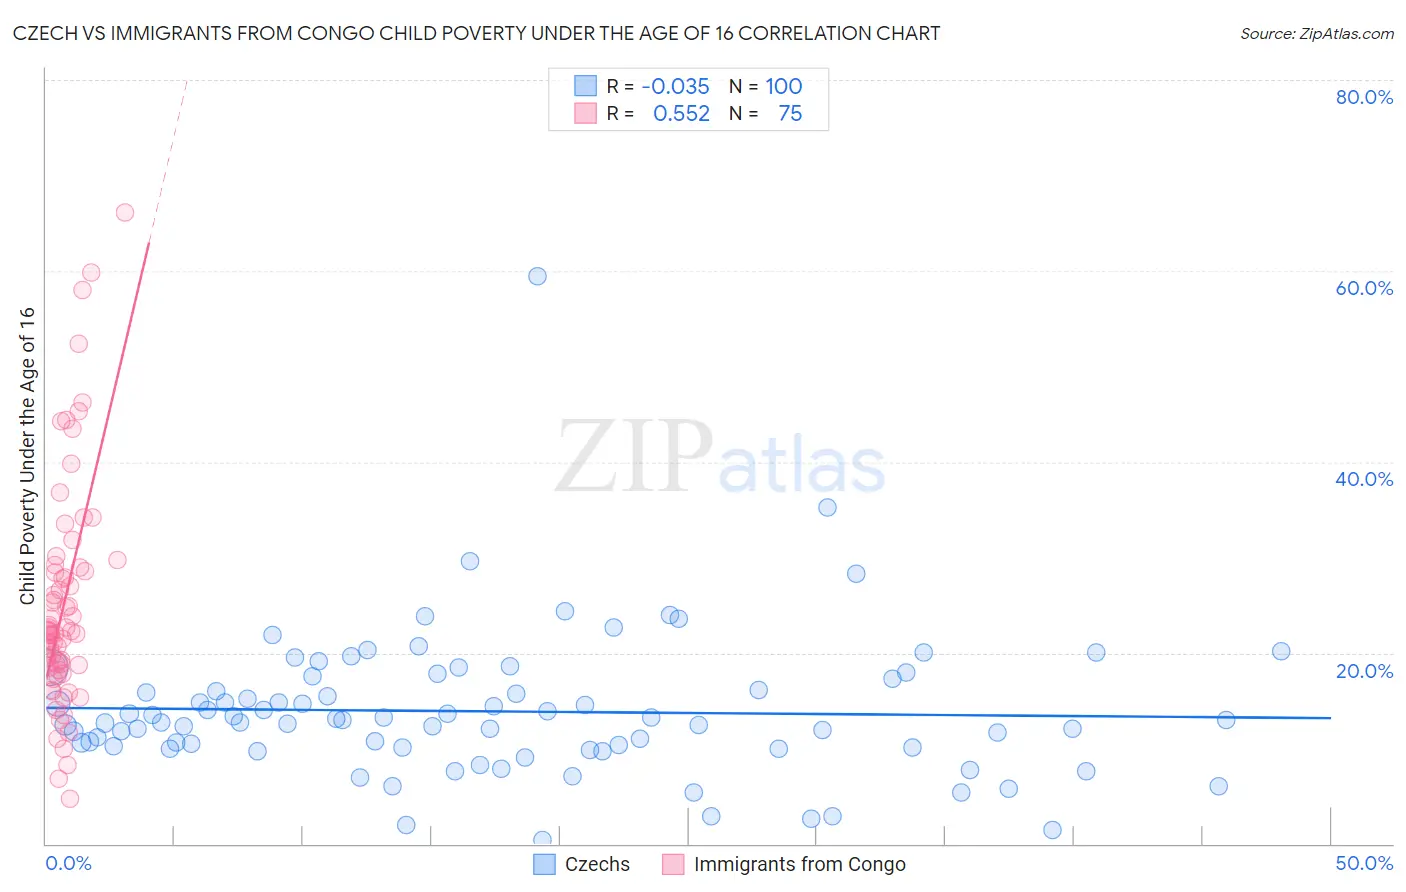 Czech vs Immigrants from Congo Child Poverty Under the Age of 16